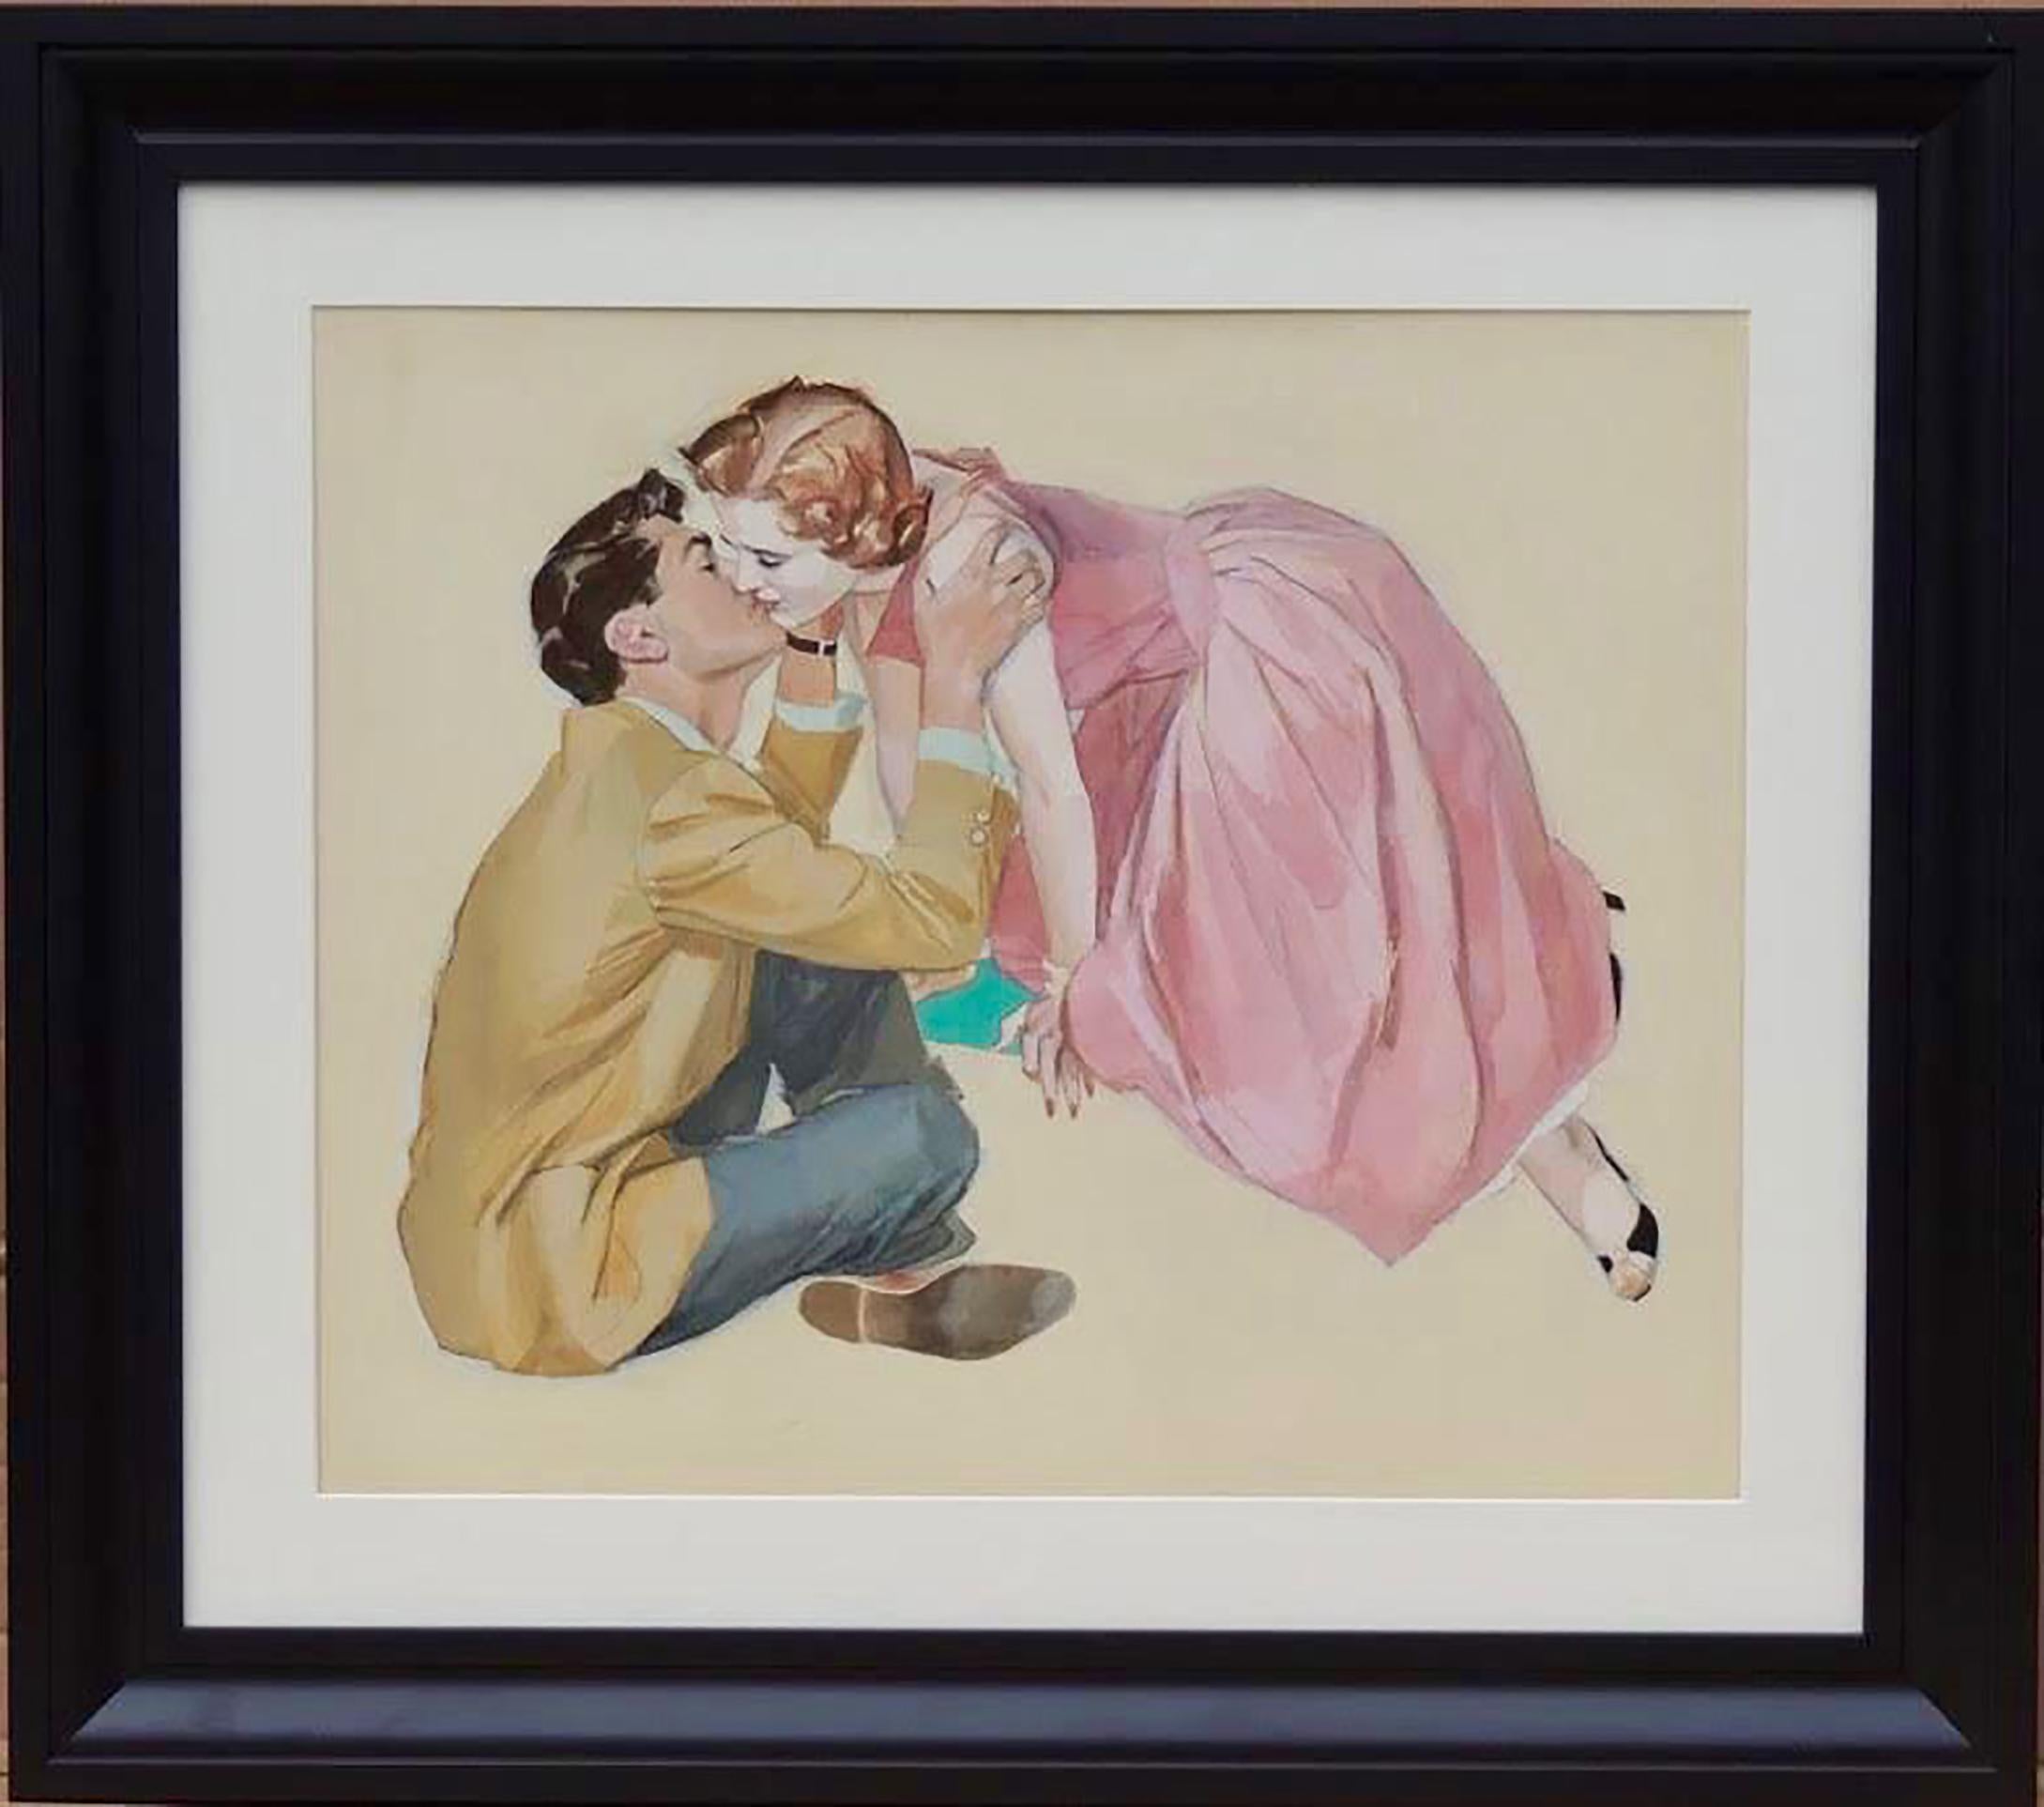 A Woman in a Pink Dress Leaning Over and Kissing Seated Man - Art by John Lagatta